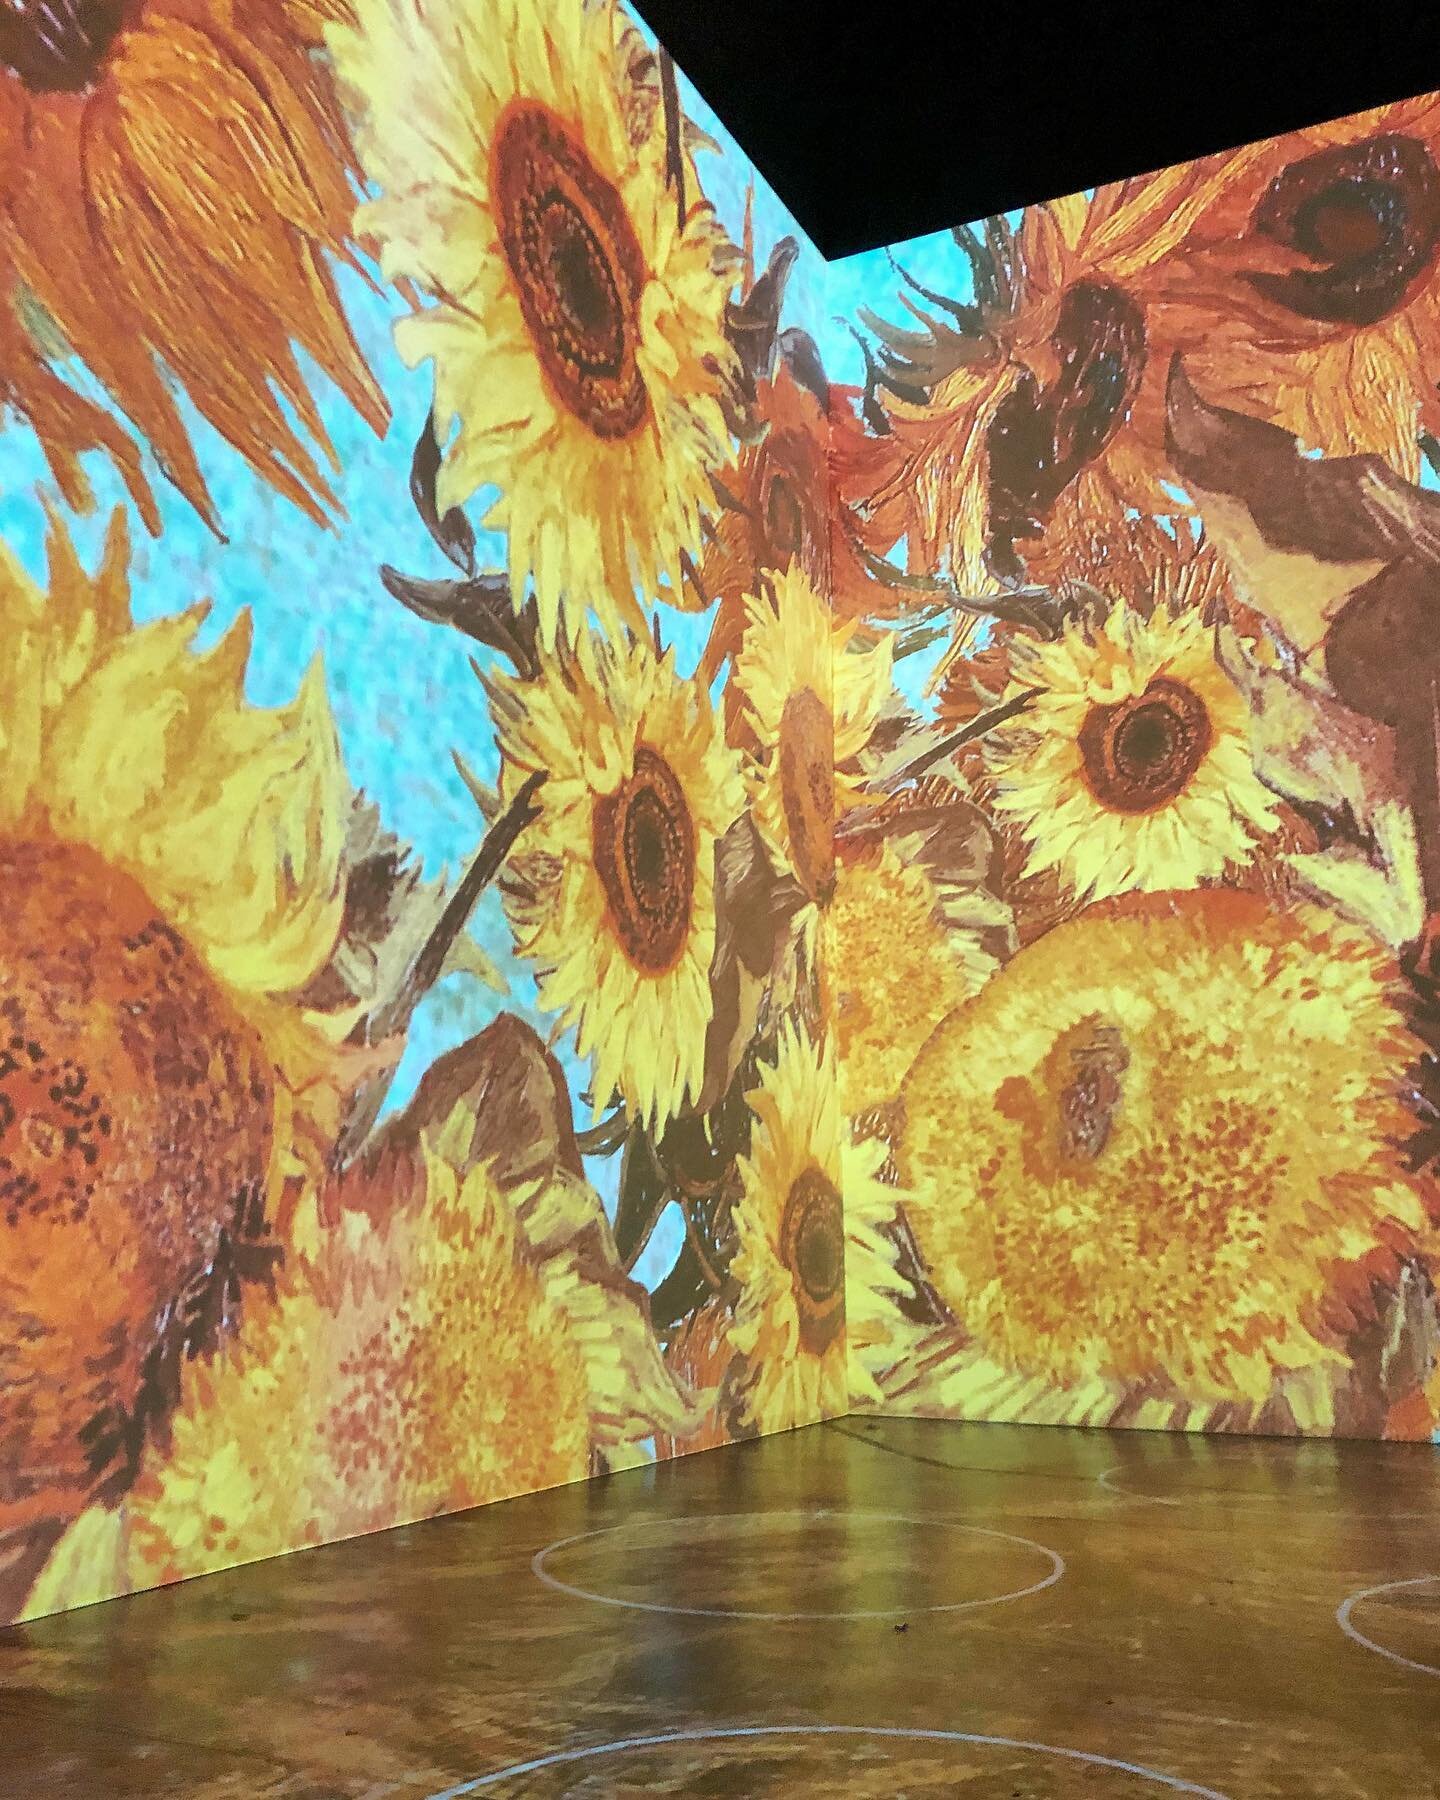 We were actually quite impressed by the @immersivevangogh exhibit today. At different points, it was meditative and quite evocative. The videos of it don&rsquo;t do it justice as this is truly an immersive experience that must be seen and felt in per